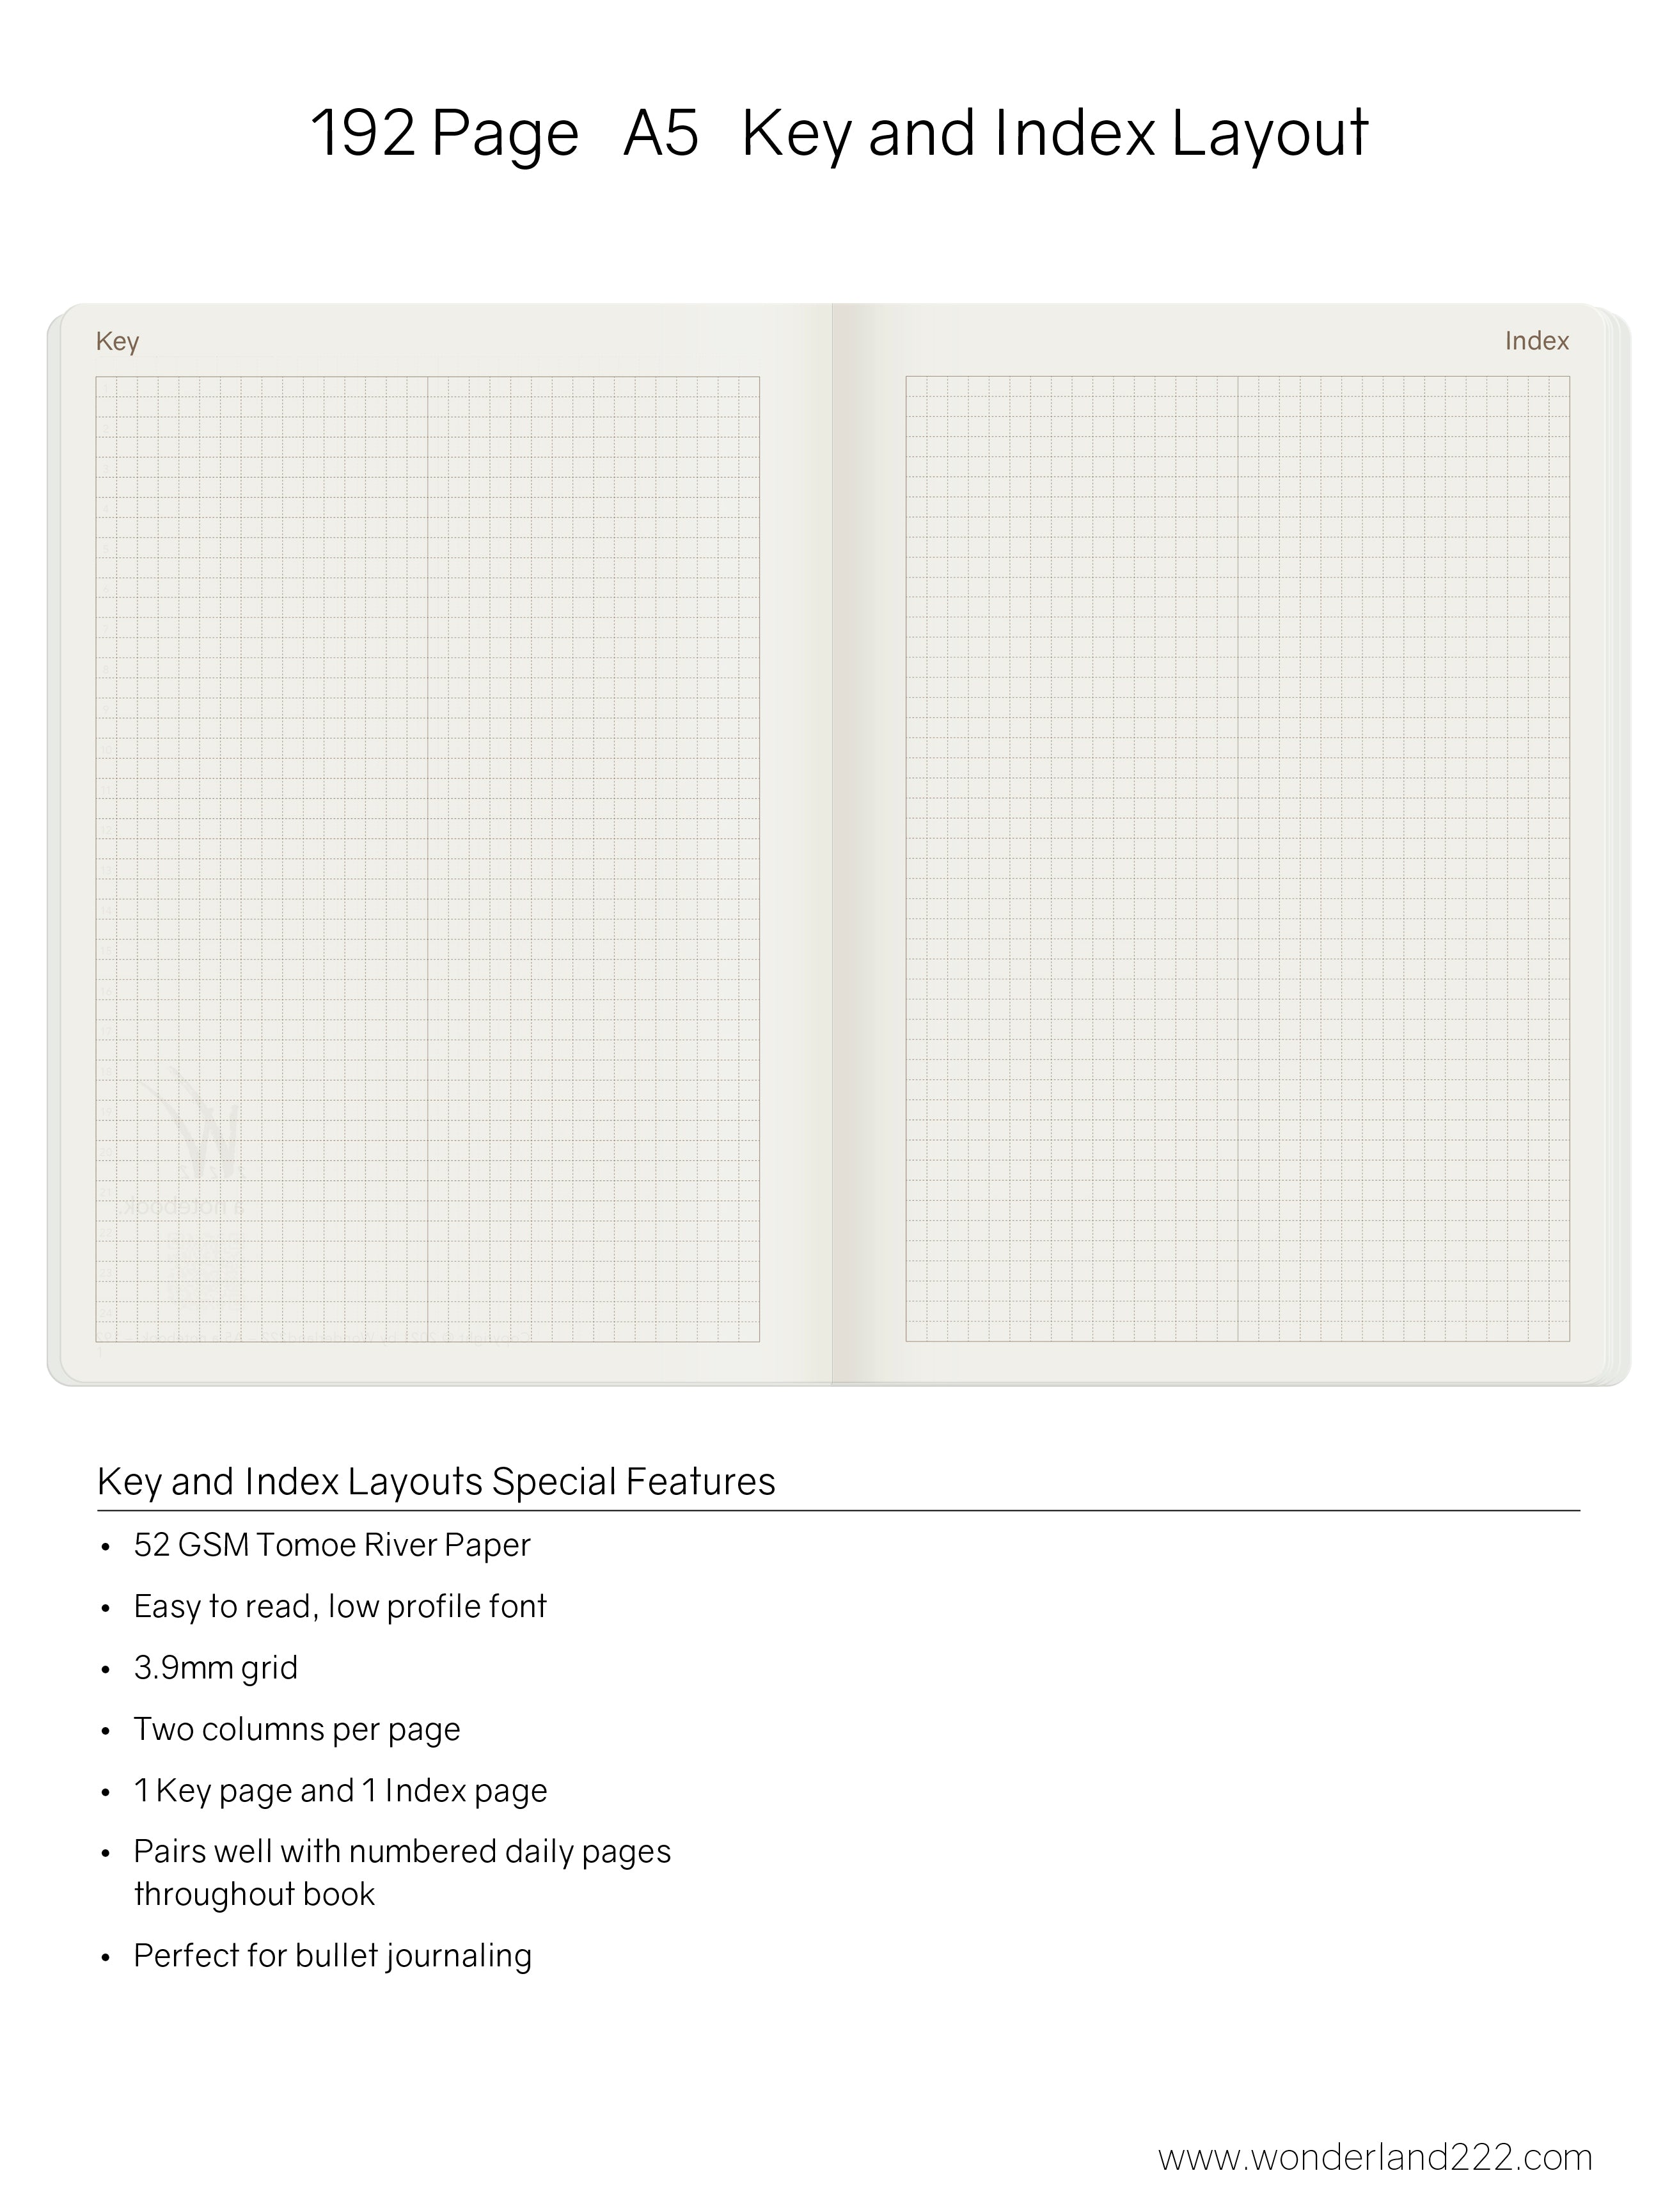 A5 Notebook (192 pages) - 2023 Edition